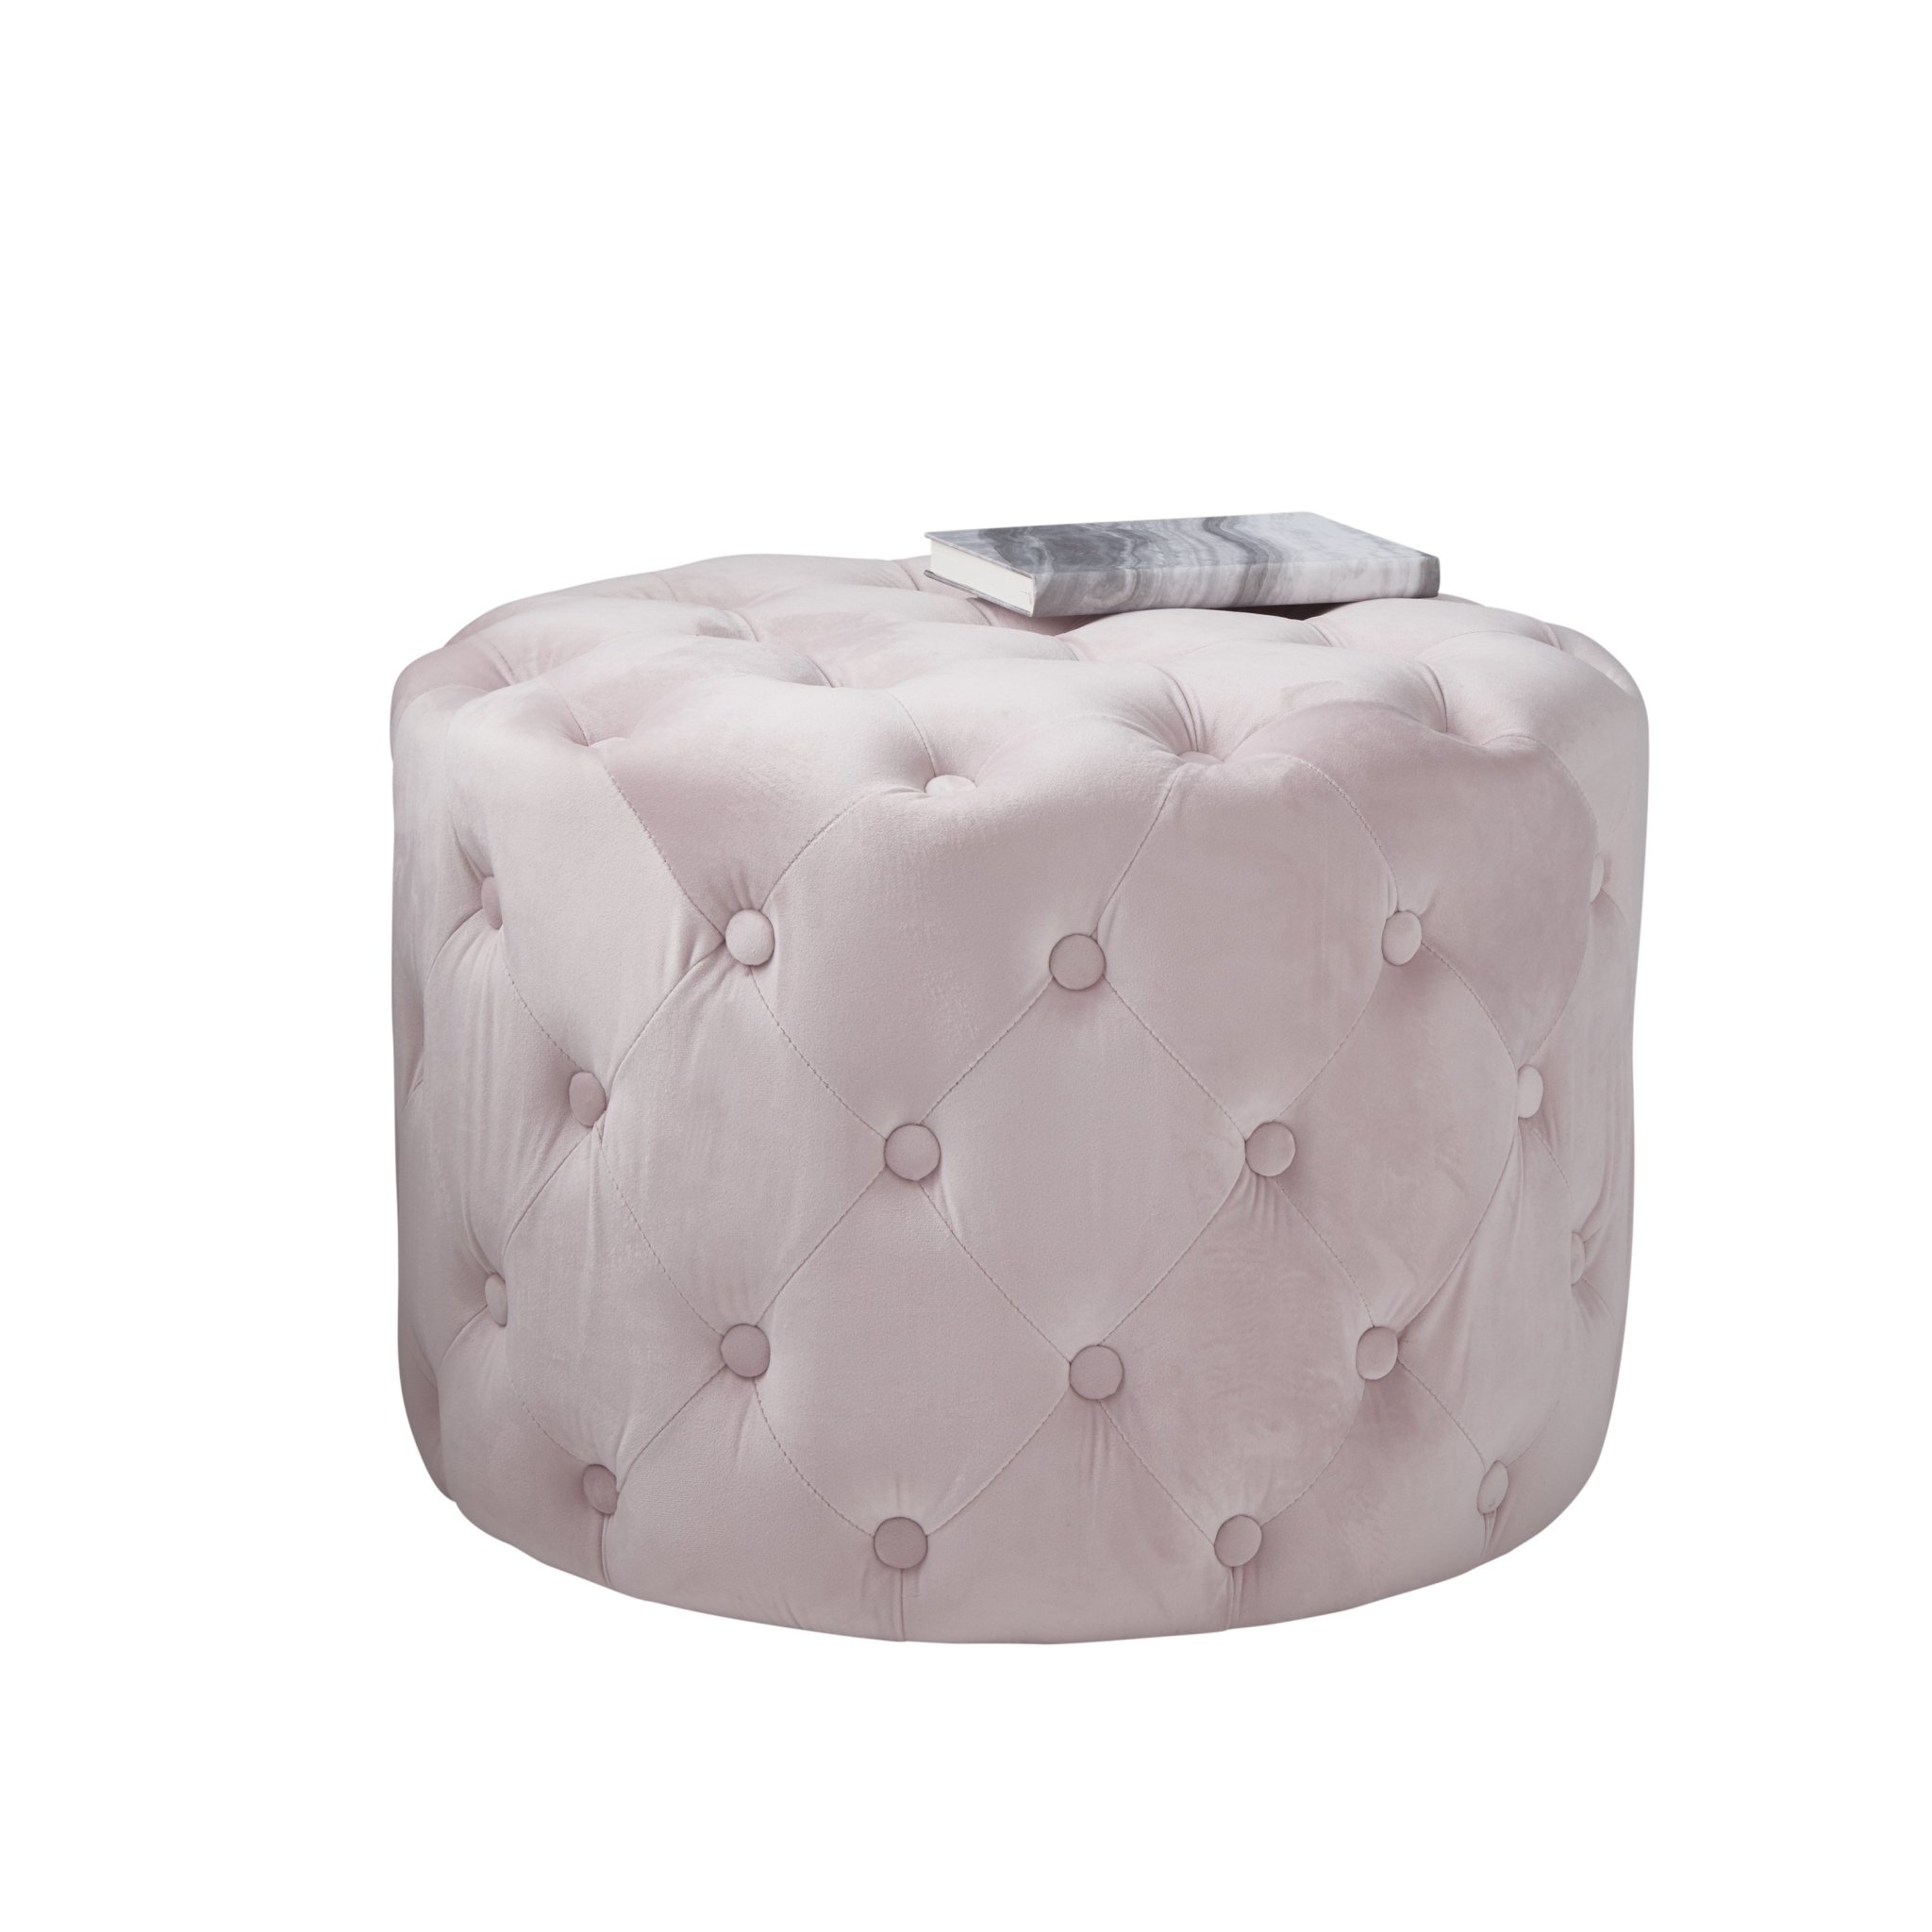 Native Home & Lifestyle Pouffe in Pastel Pink Tufted Velvet 60 x 60 x 42cm – Furniture & Homeware – The Luxe Home